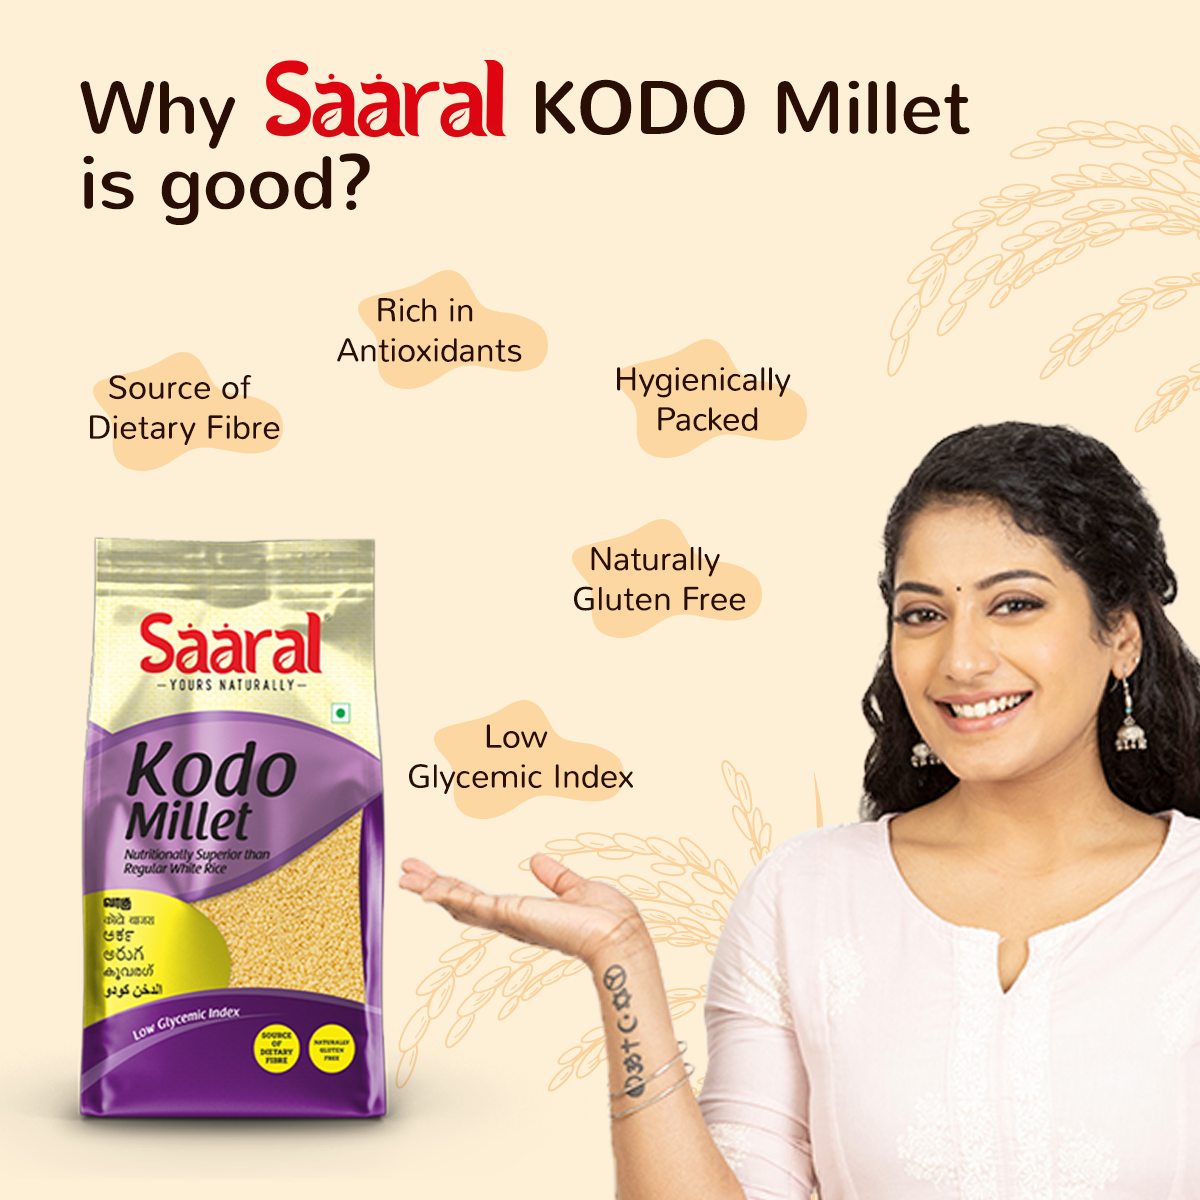 SAARAL Millets - Natural Grains Combo Pack of 3, Foxtail 500 g, Kodo 500 g, Little 500 g, Native Low GI Millet Rice